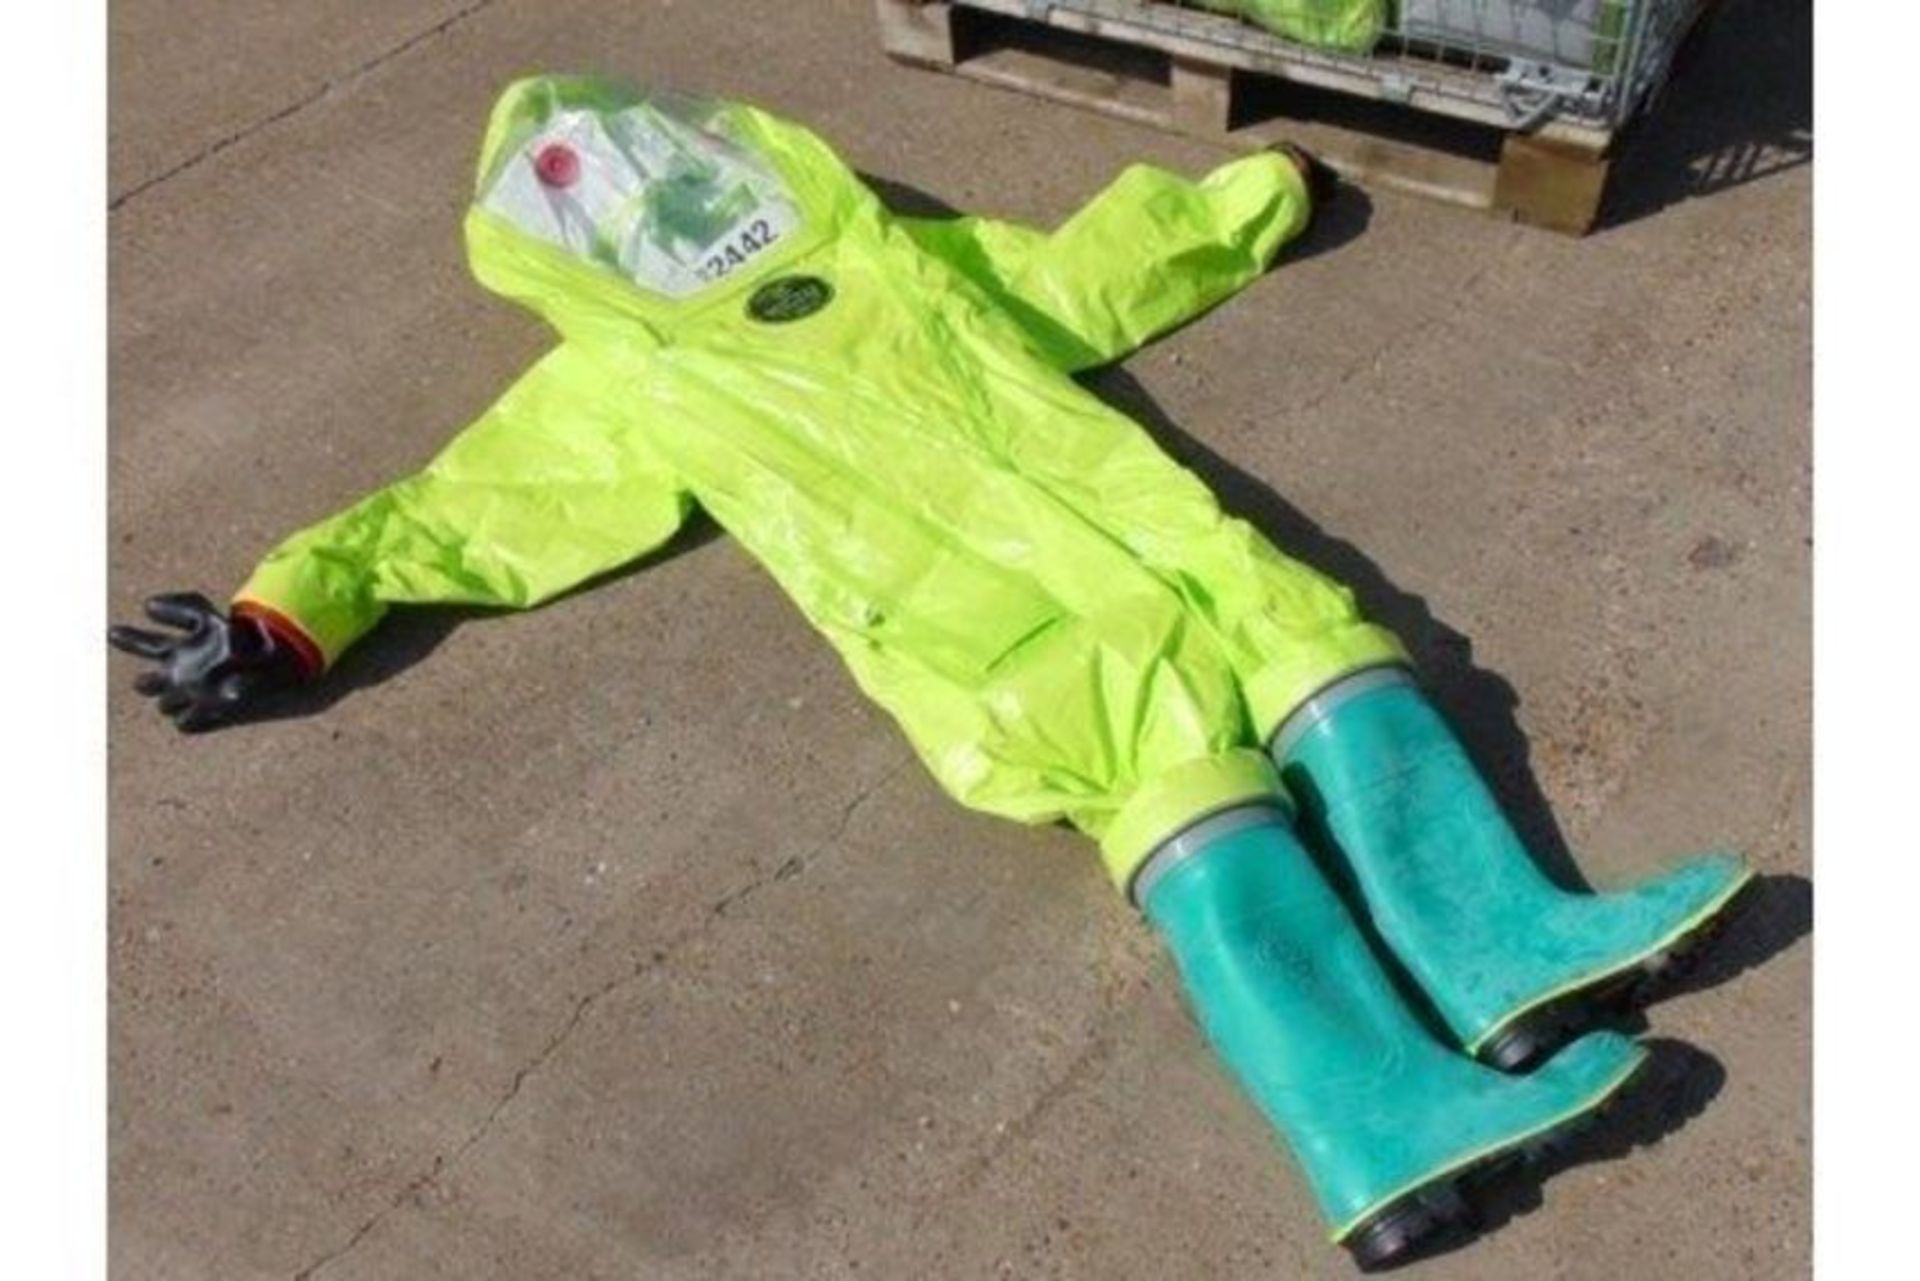 10 x Respirex Tychem TK Gas-Tight Hazmat Suit Type 1A with Attached Boots and Gloves - Image 8 of 10